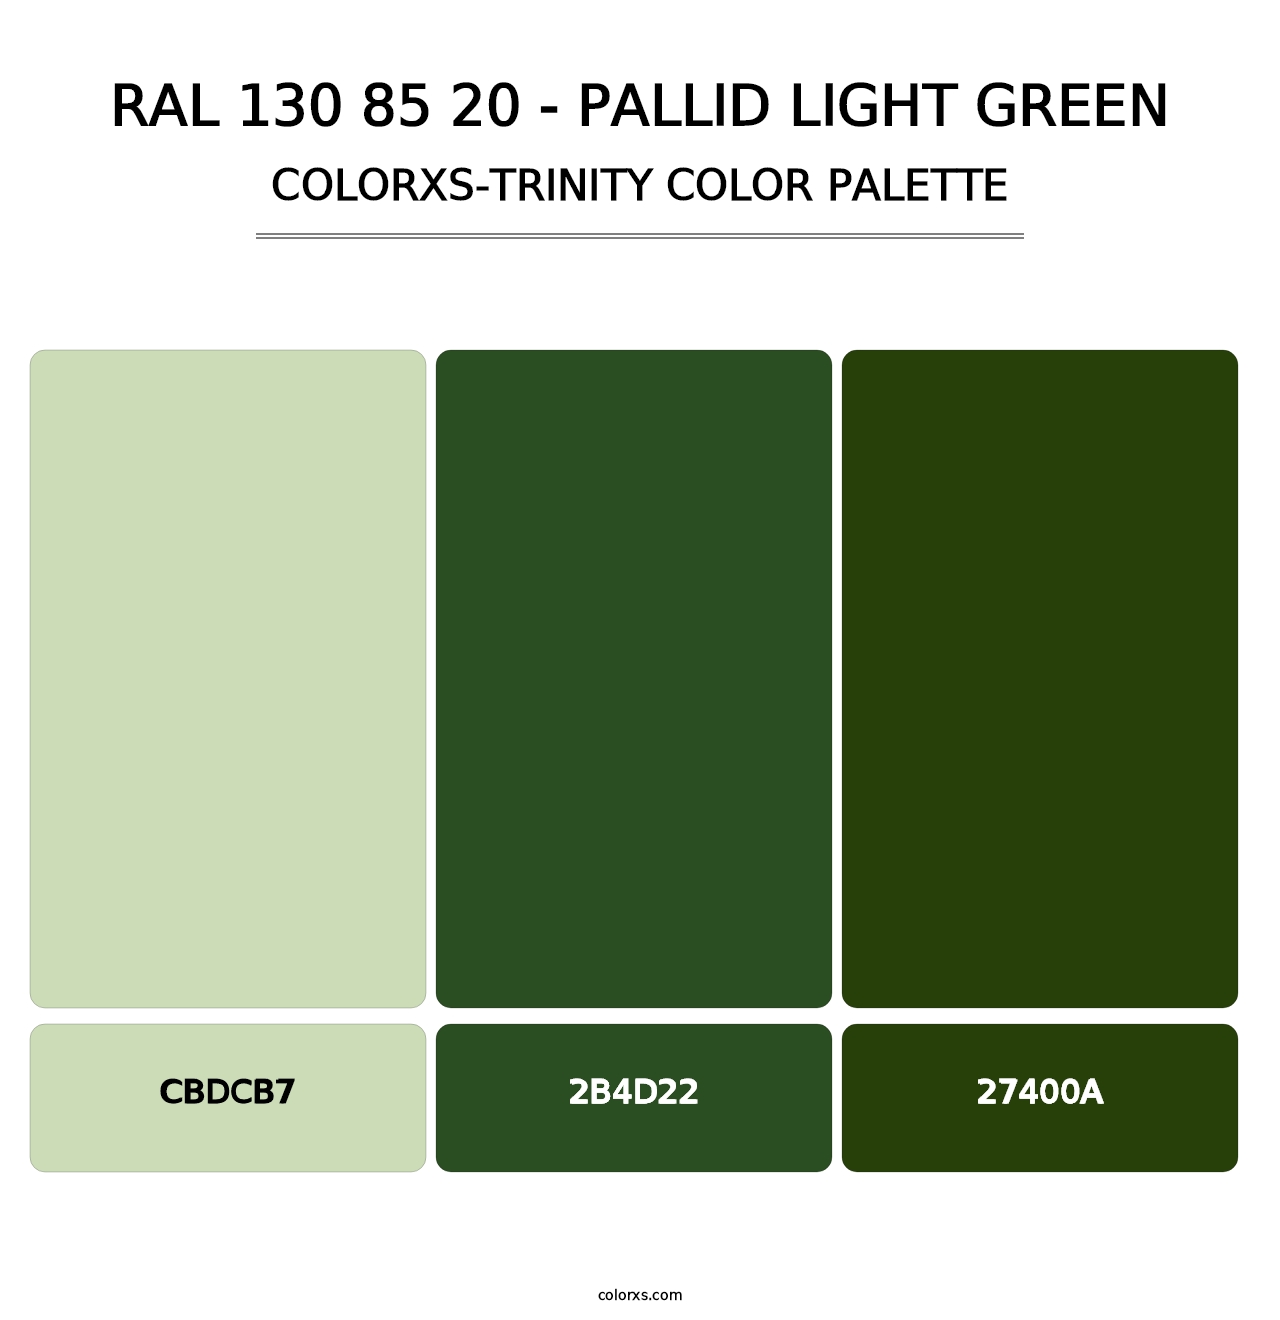 RAL 130 85 20 - Pallid Light Green - Colorxs Trinity Palette